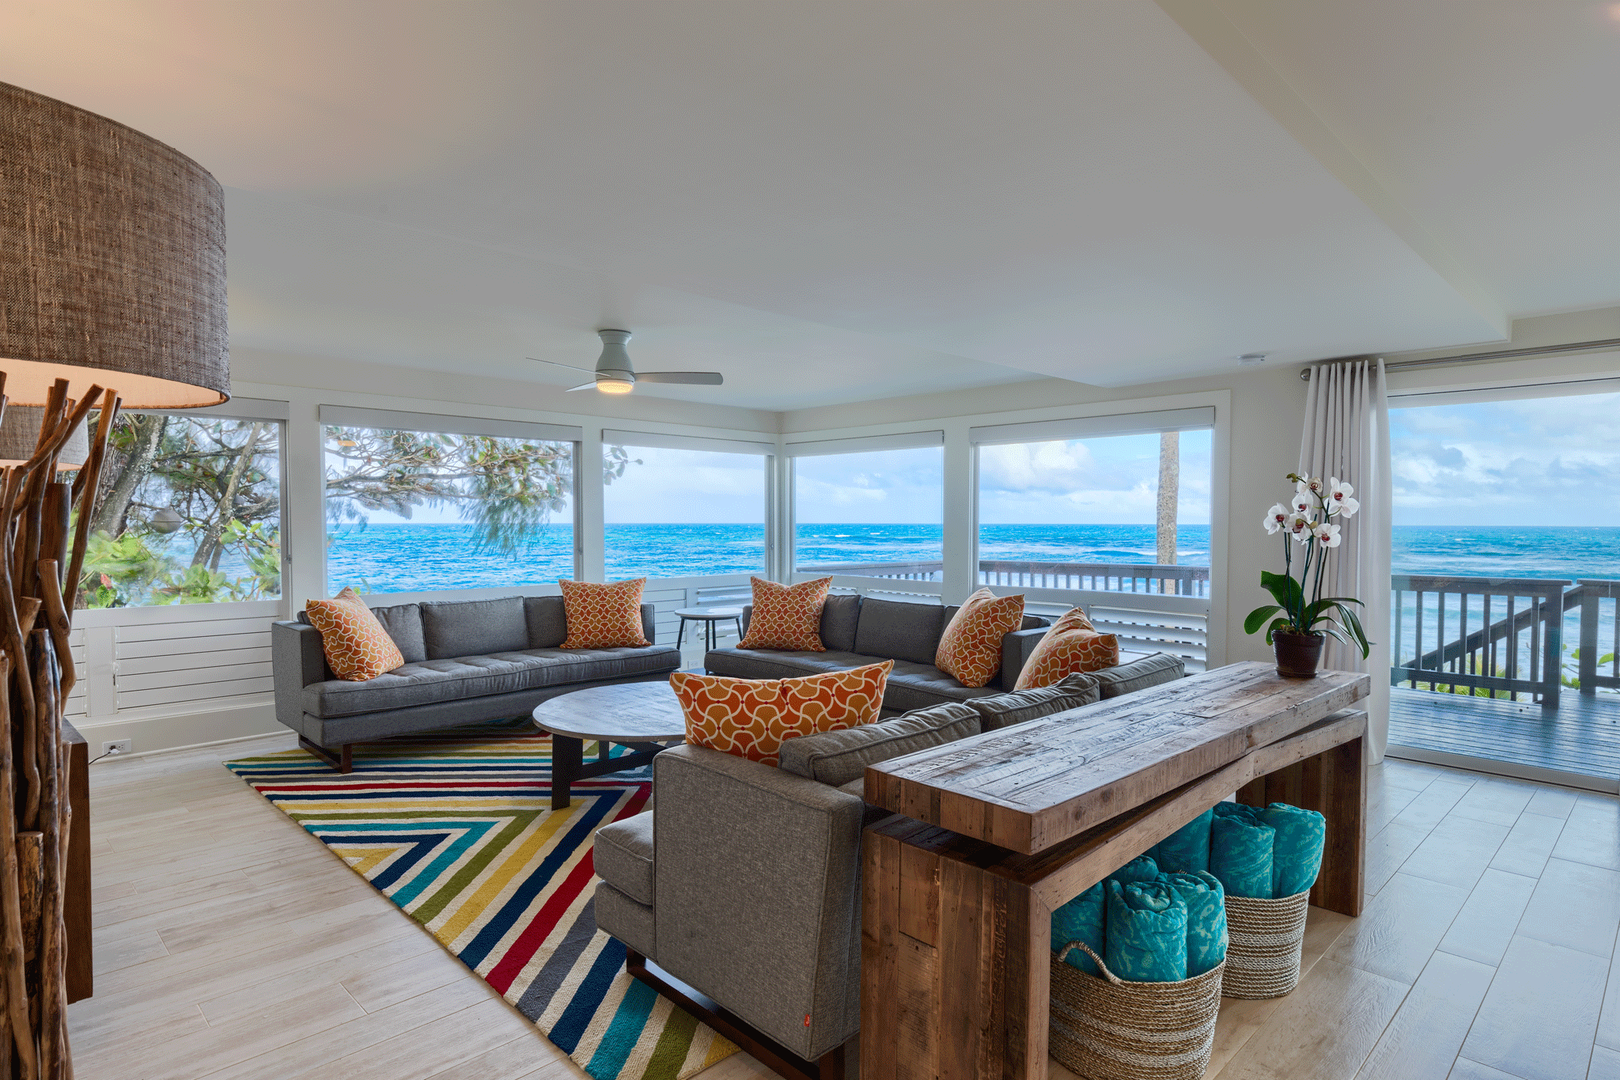 Hanalei Vacation Rentals, Haena Beach House TVNC#1258 - Living room with direct ocean views.